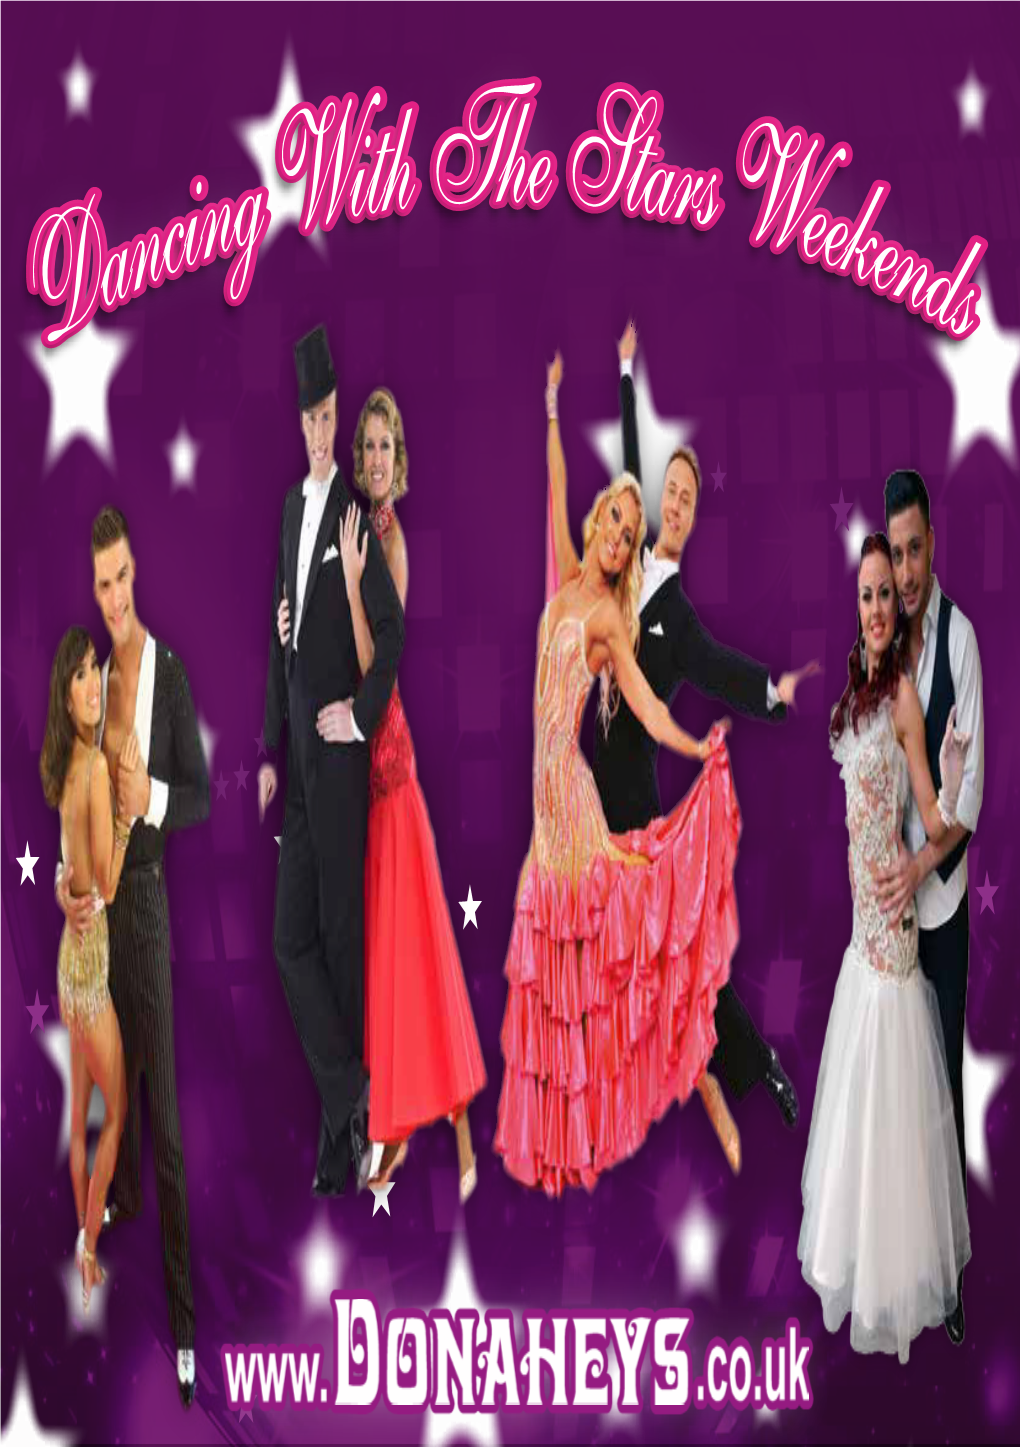 Dancing with the Stars Weekends